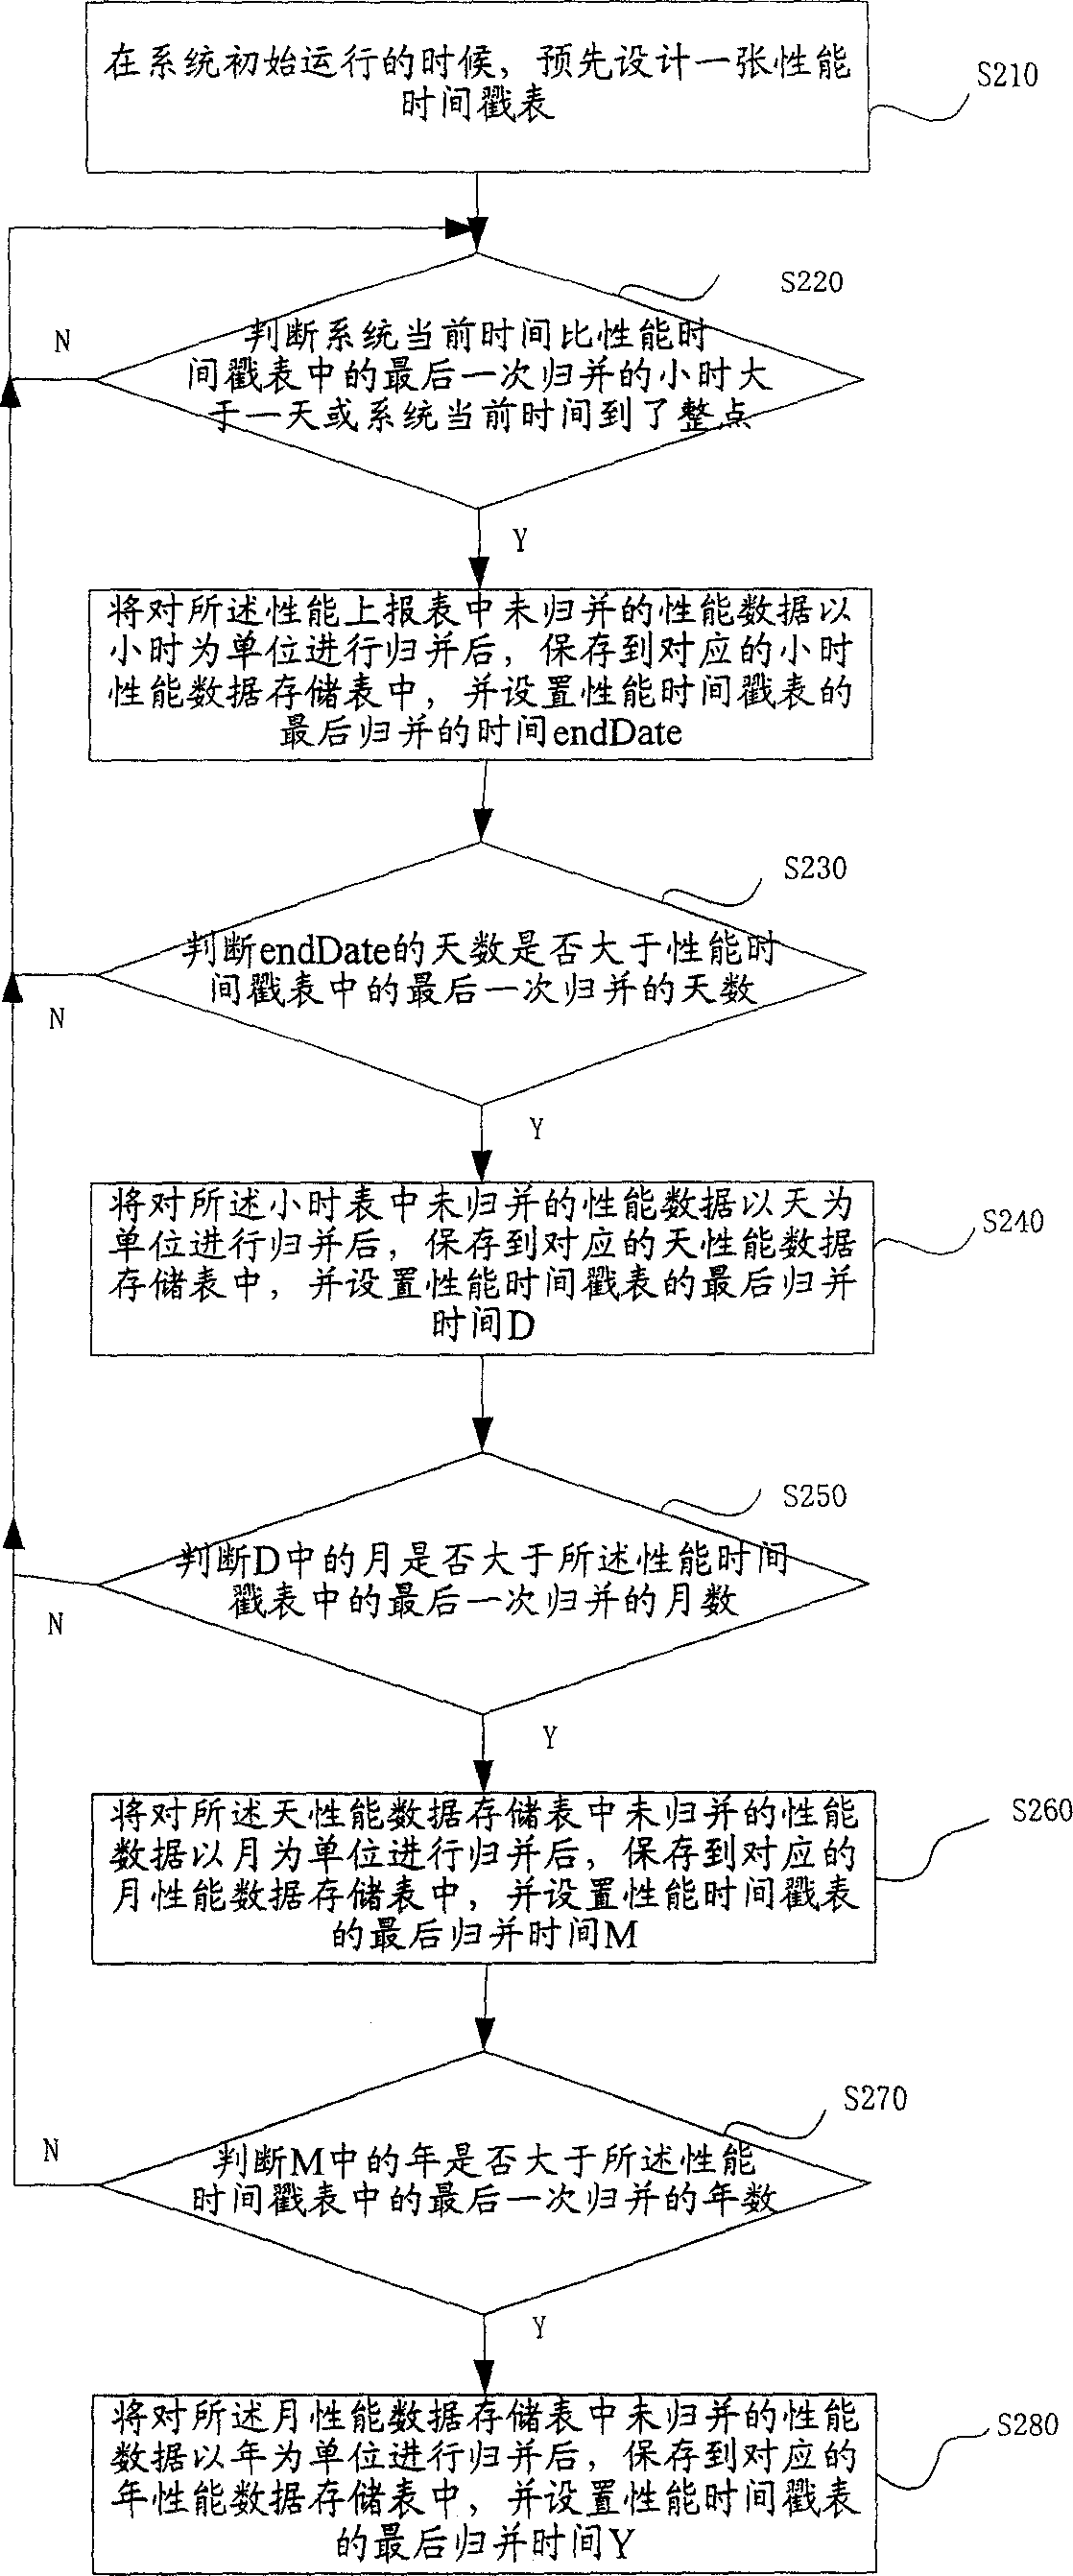 Mass performance data statistical method in network element management system